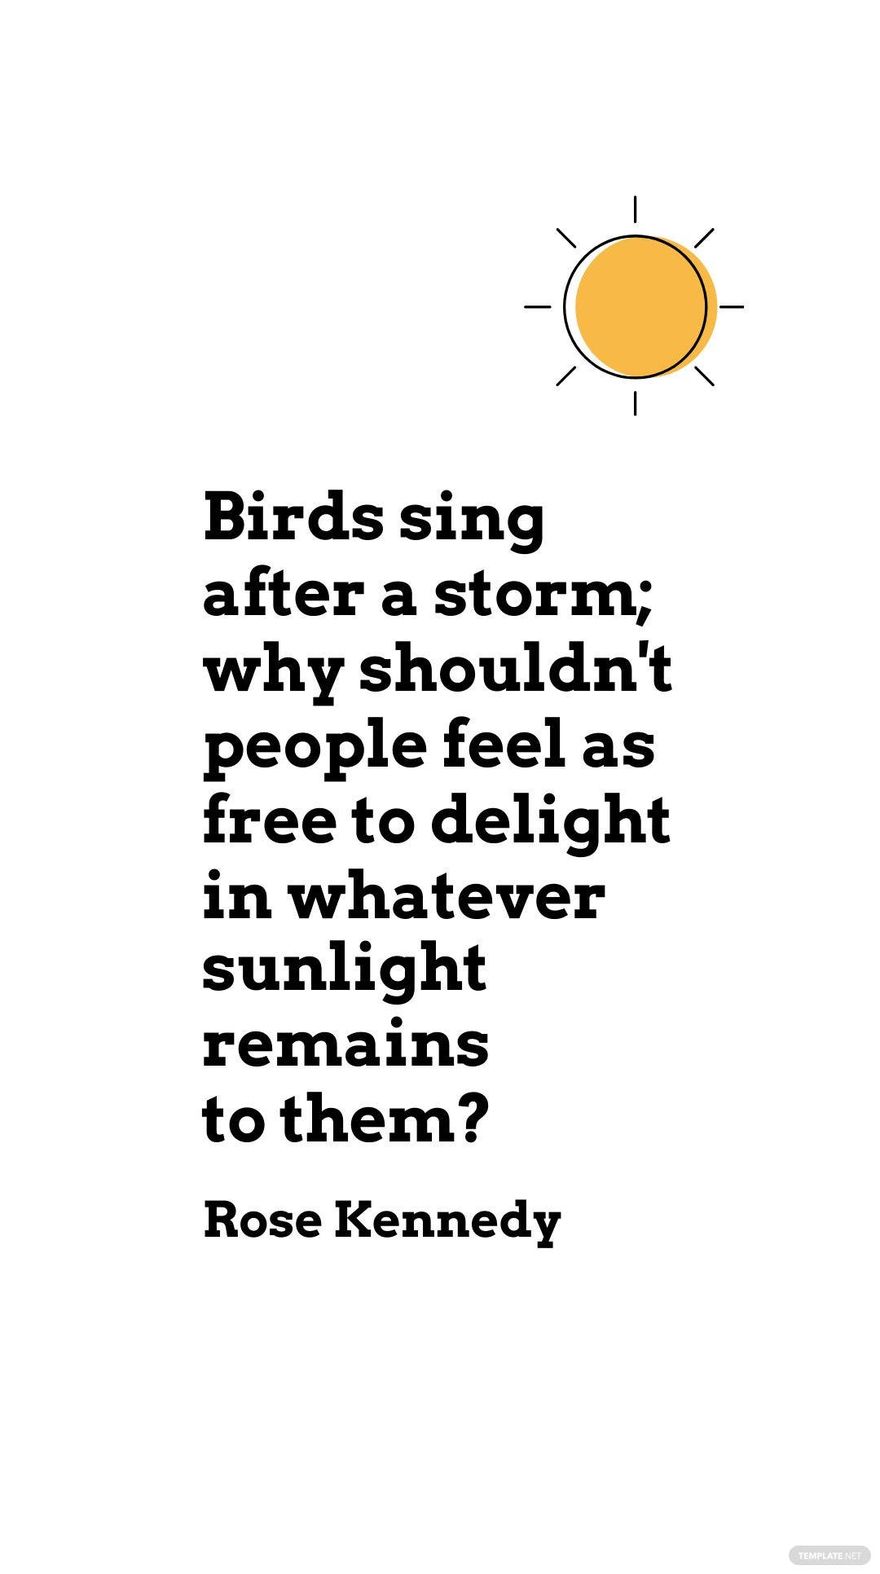 Rose Kennedy - Birds sing after a storm; why shouldn't people feel as to delight in whatever sunlight remains to them? in JPG